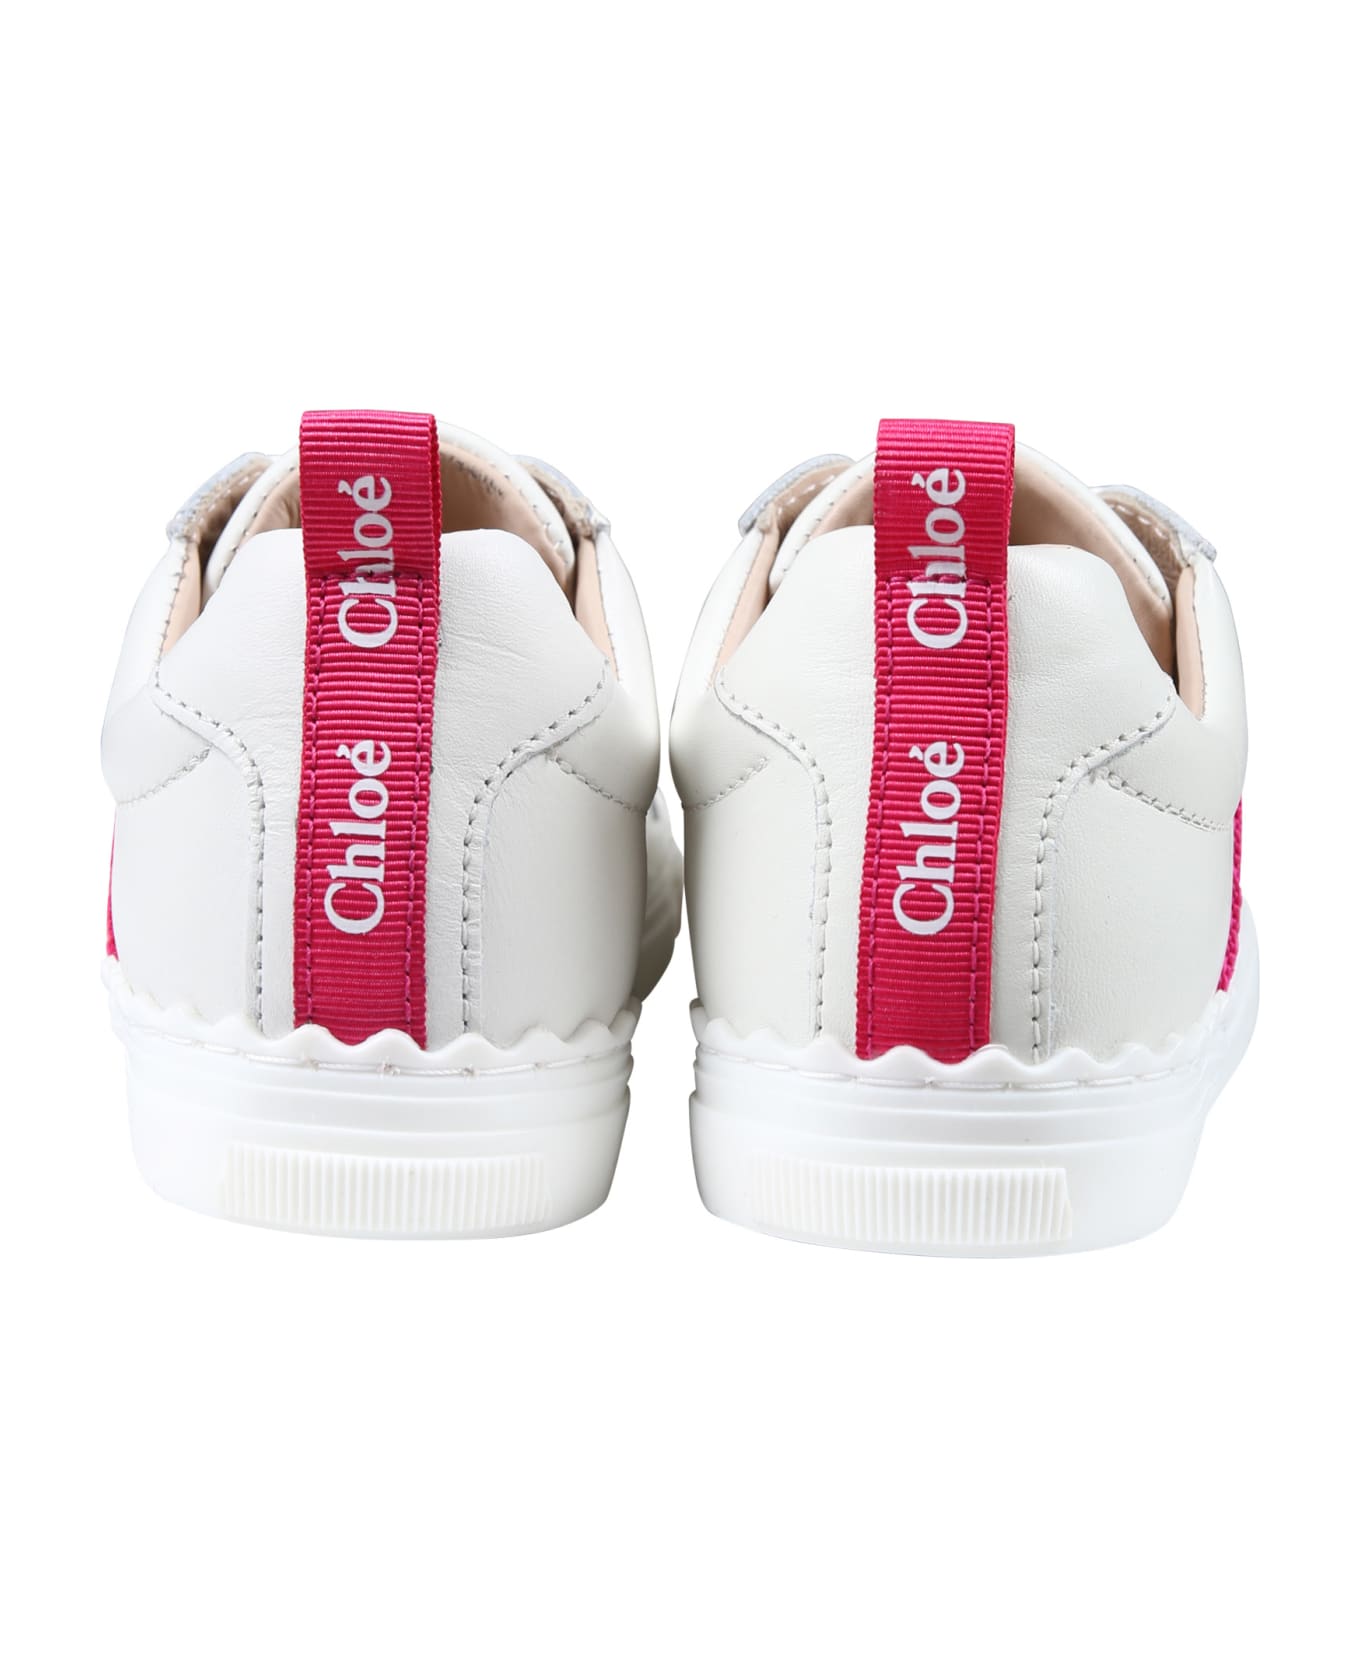 Chloé White Sneakers For Girls With Logo - Bianco シューズ